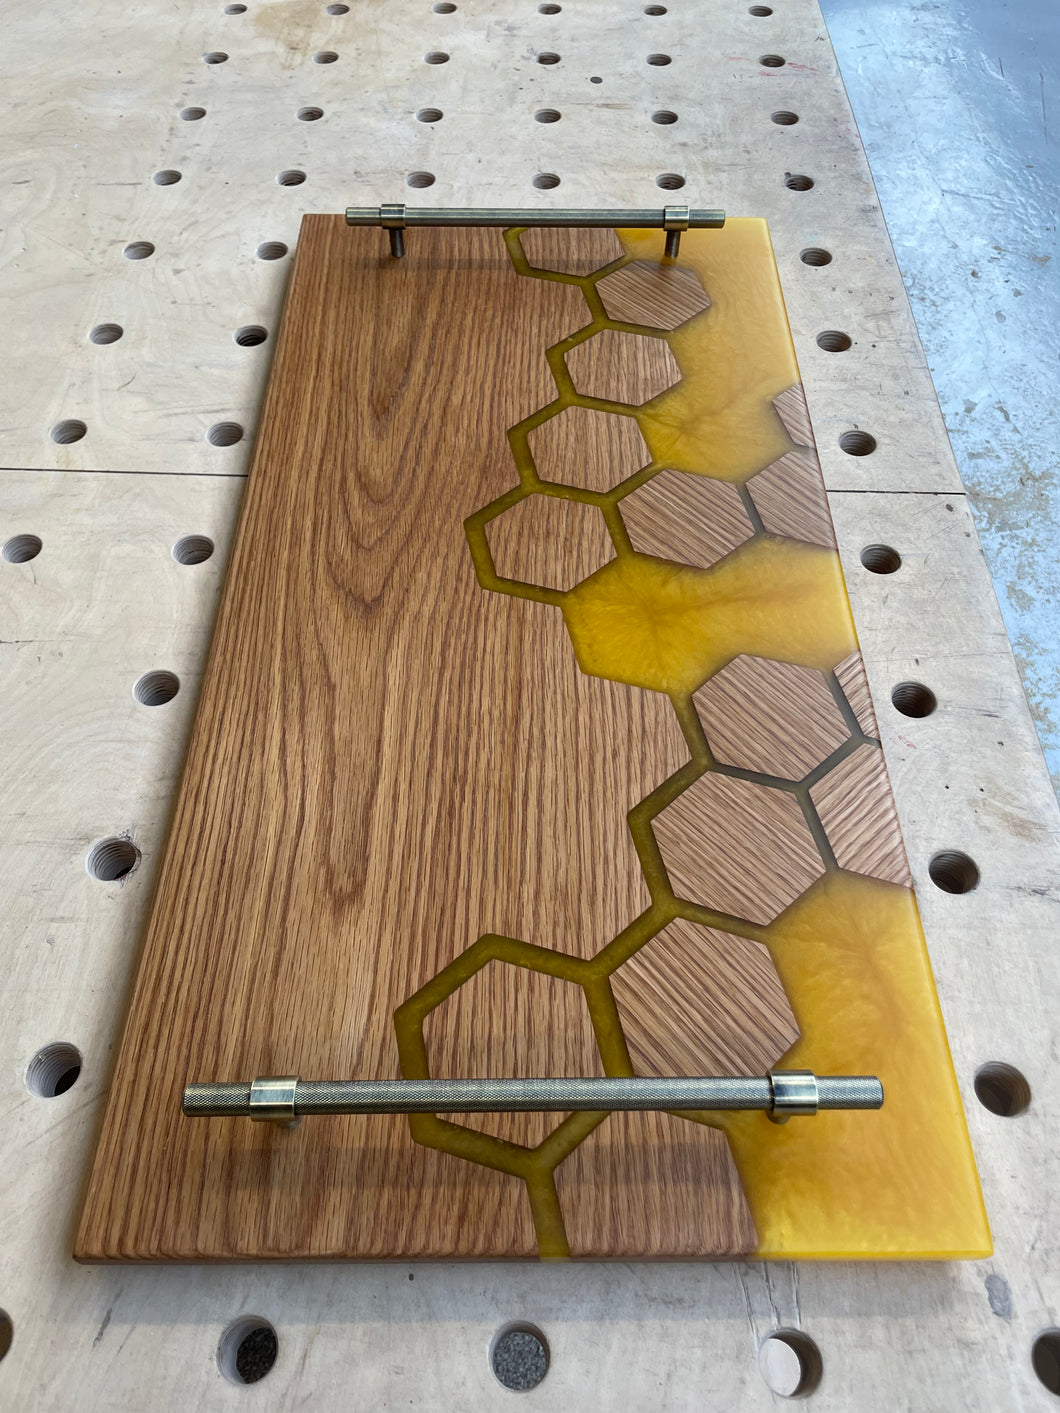 Honeycomb resin serving board - Truly unique!